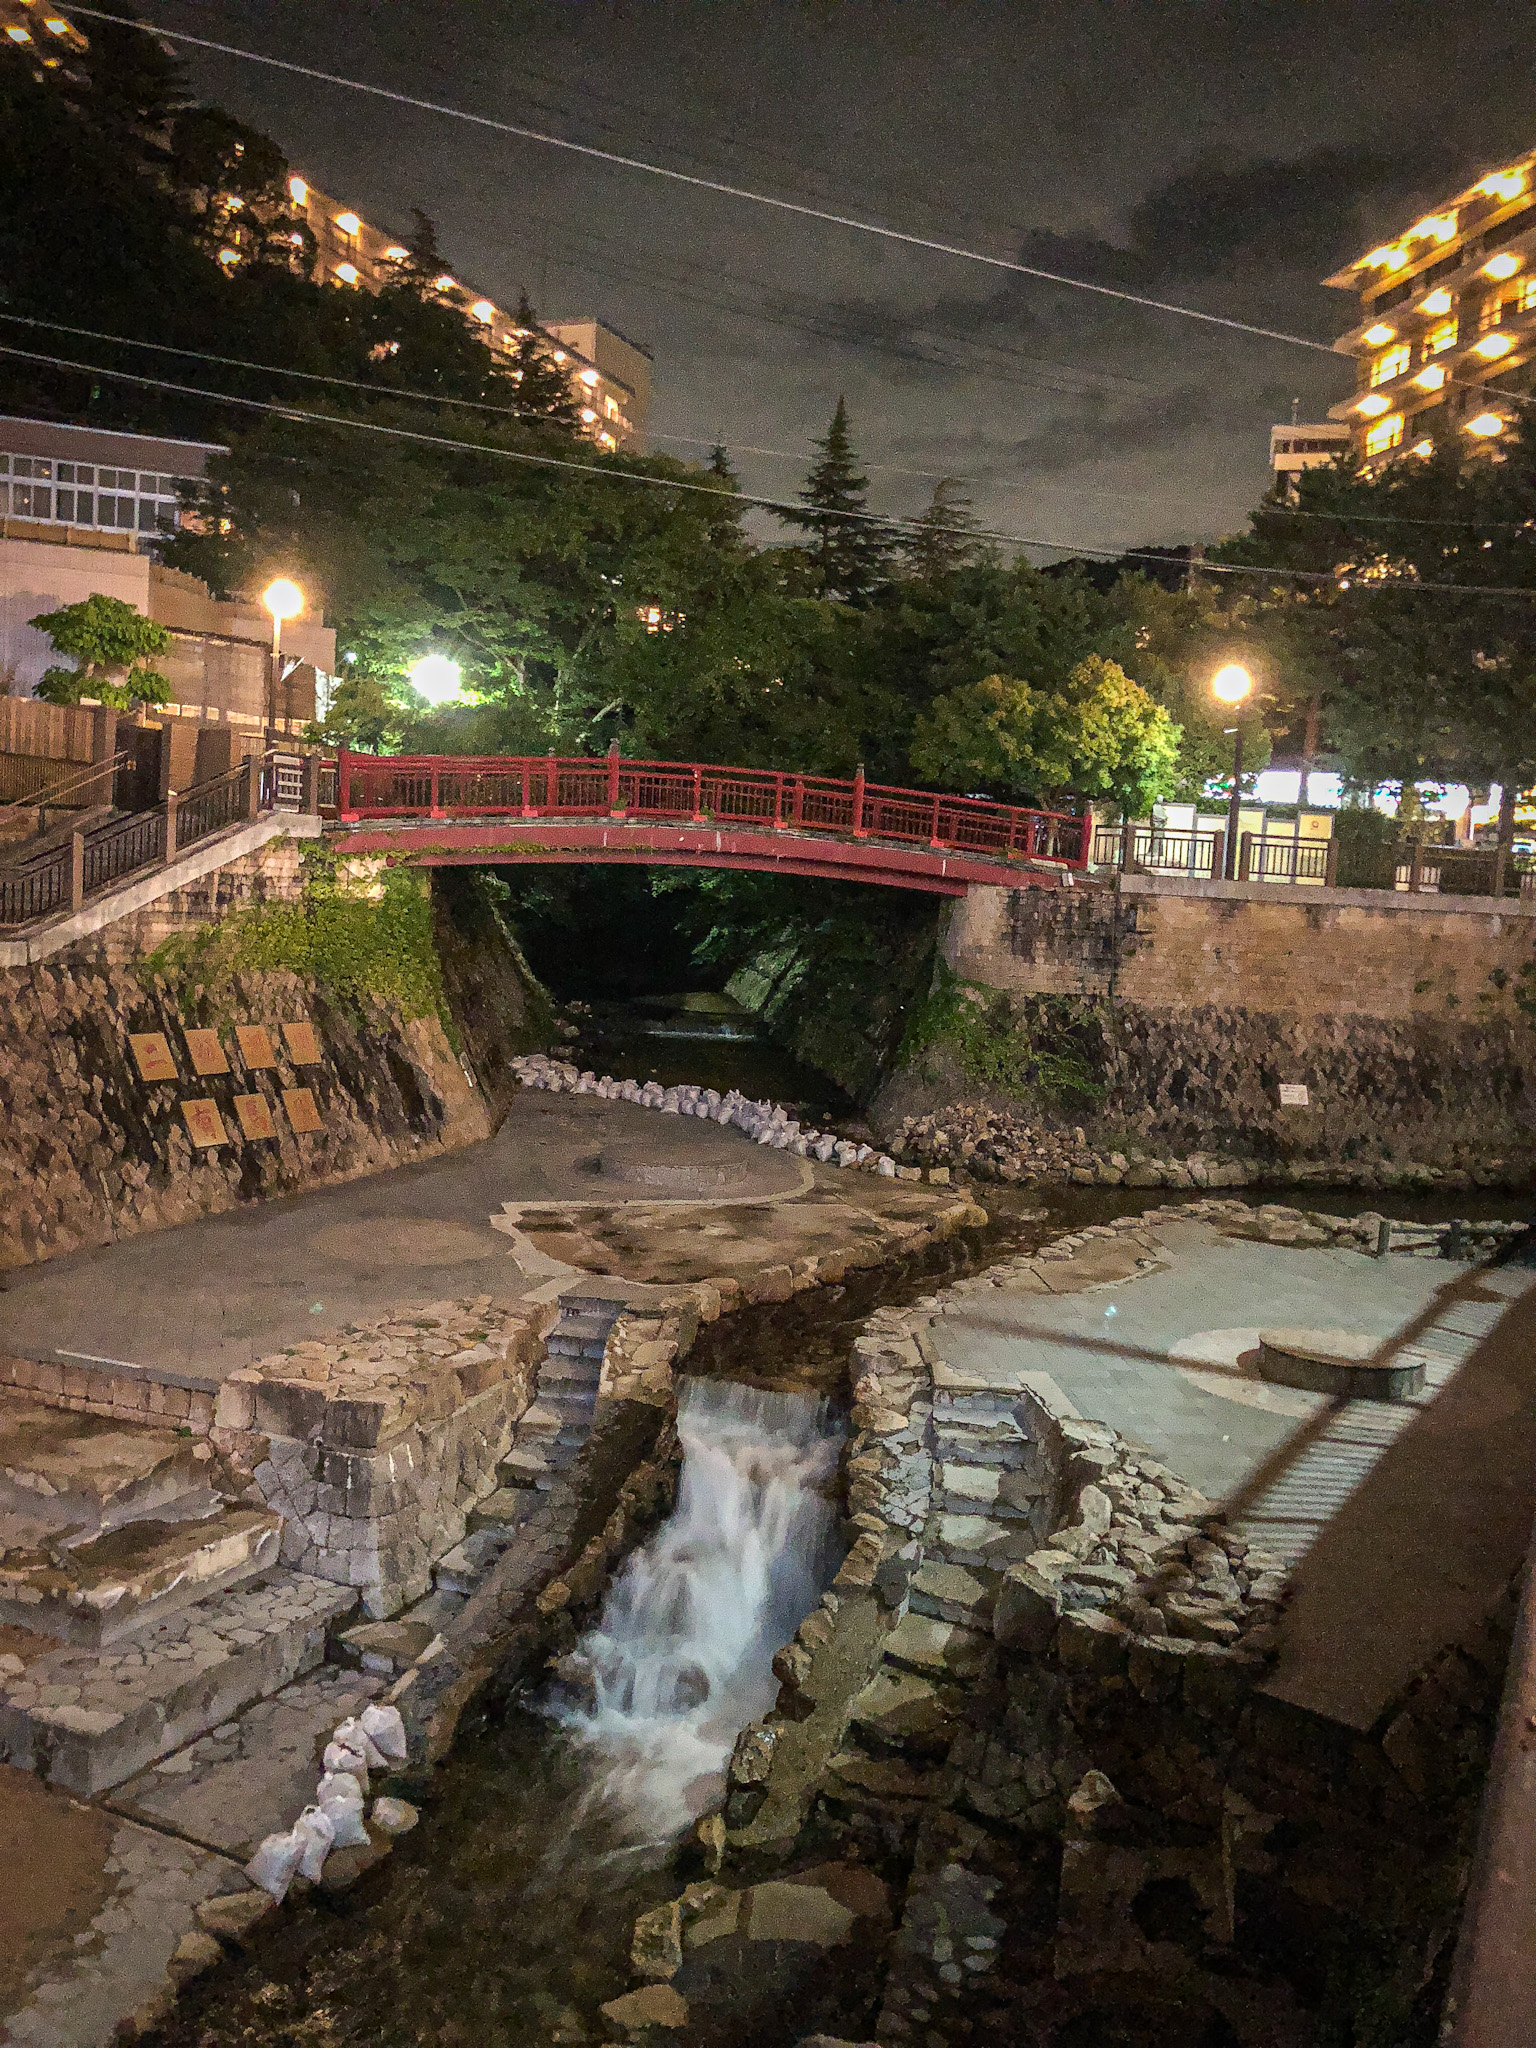 River in a Japanese village by night